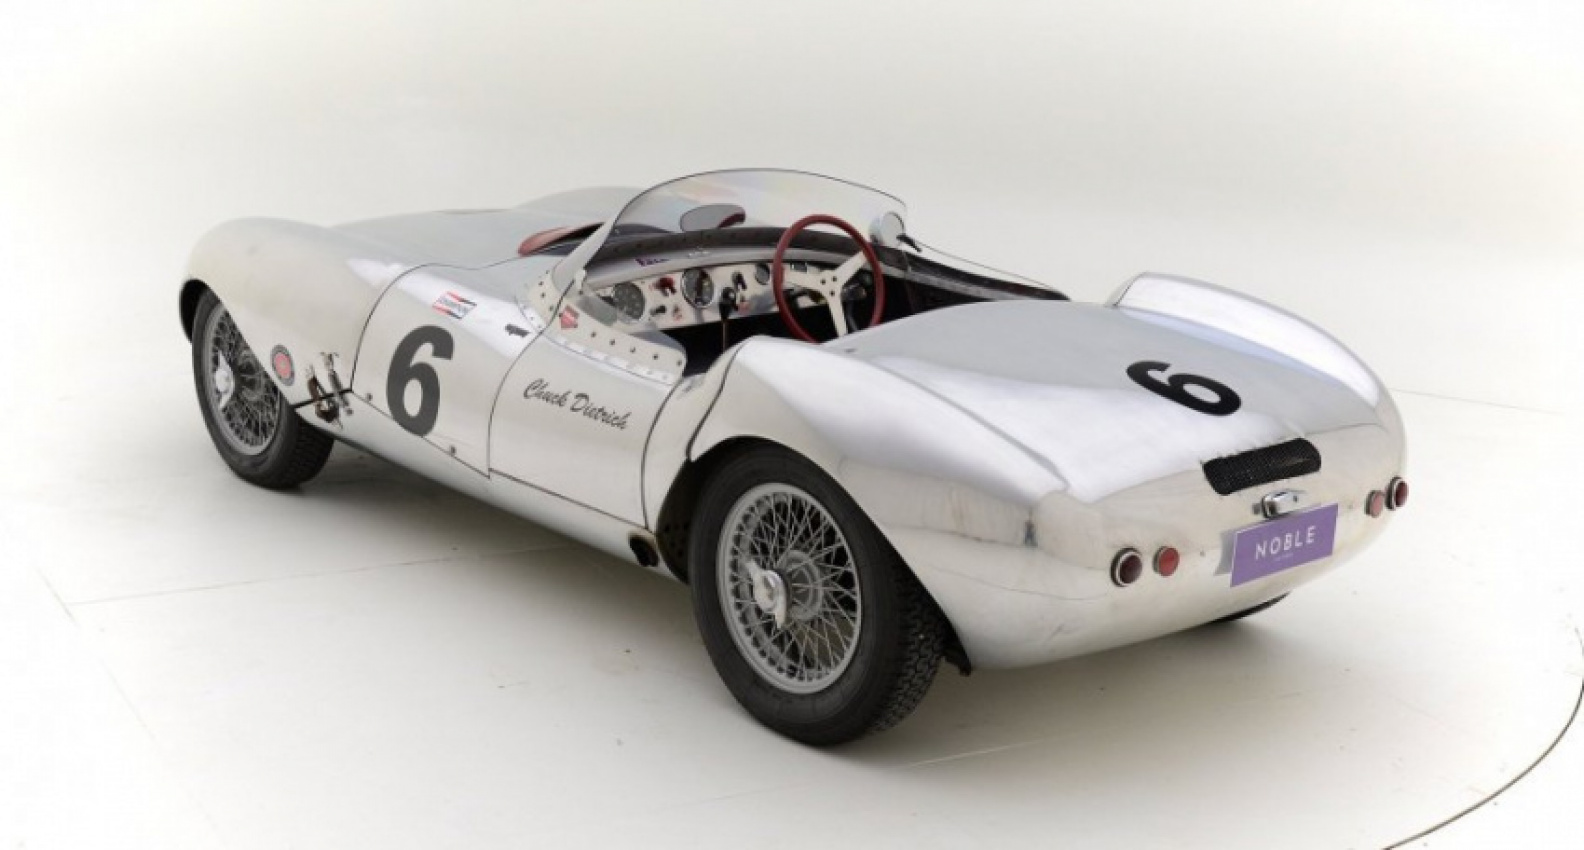 acer, autos, cars, this elva mkii is a polished period racer